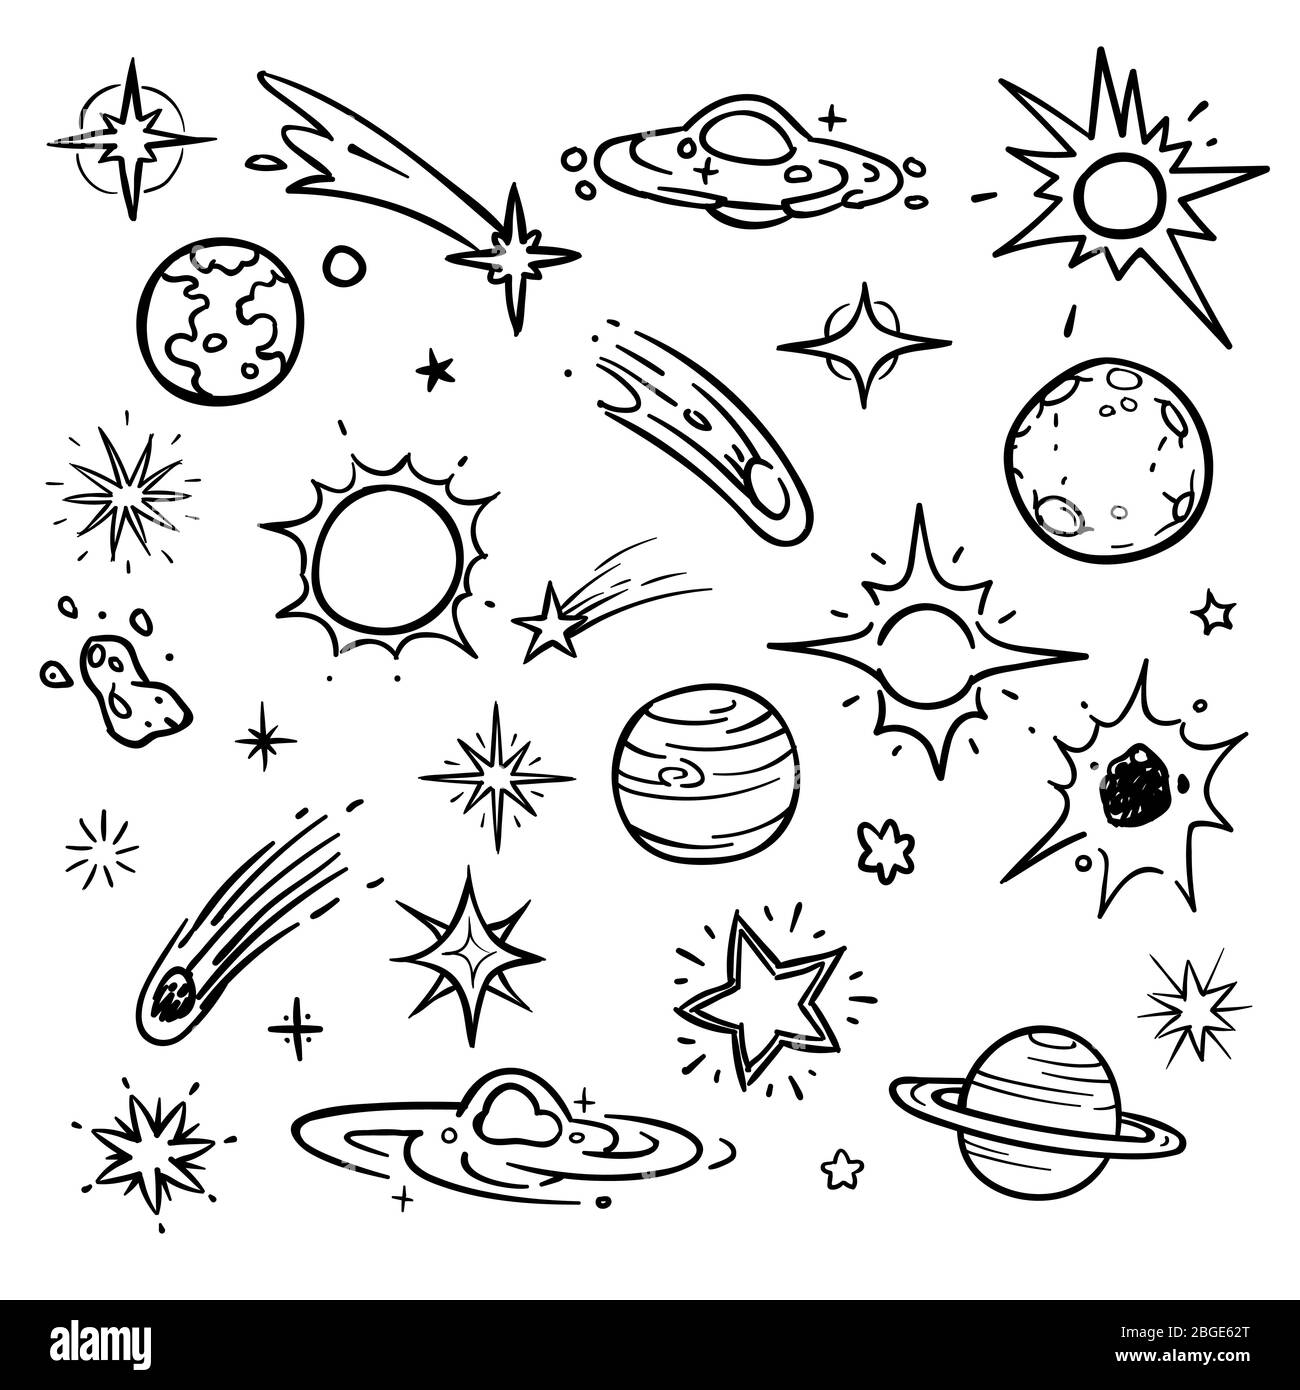 Space doodle vector elements. Hand drawn stars, comets, planets and moon in sky. Astronomy and planet, space and science illustration Stock Vector